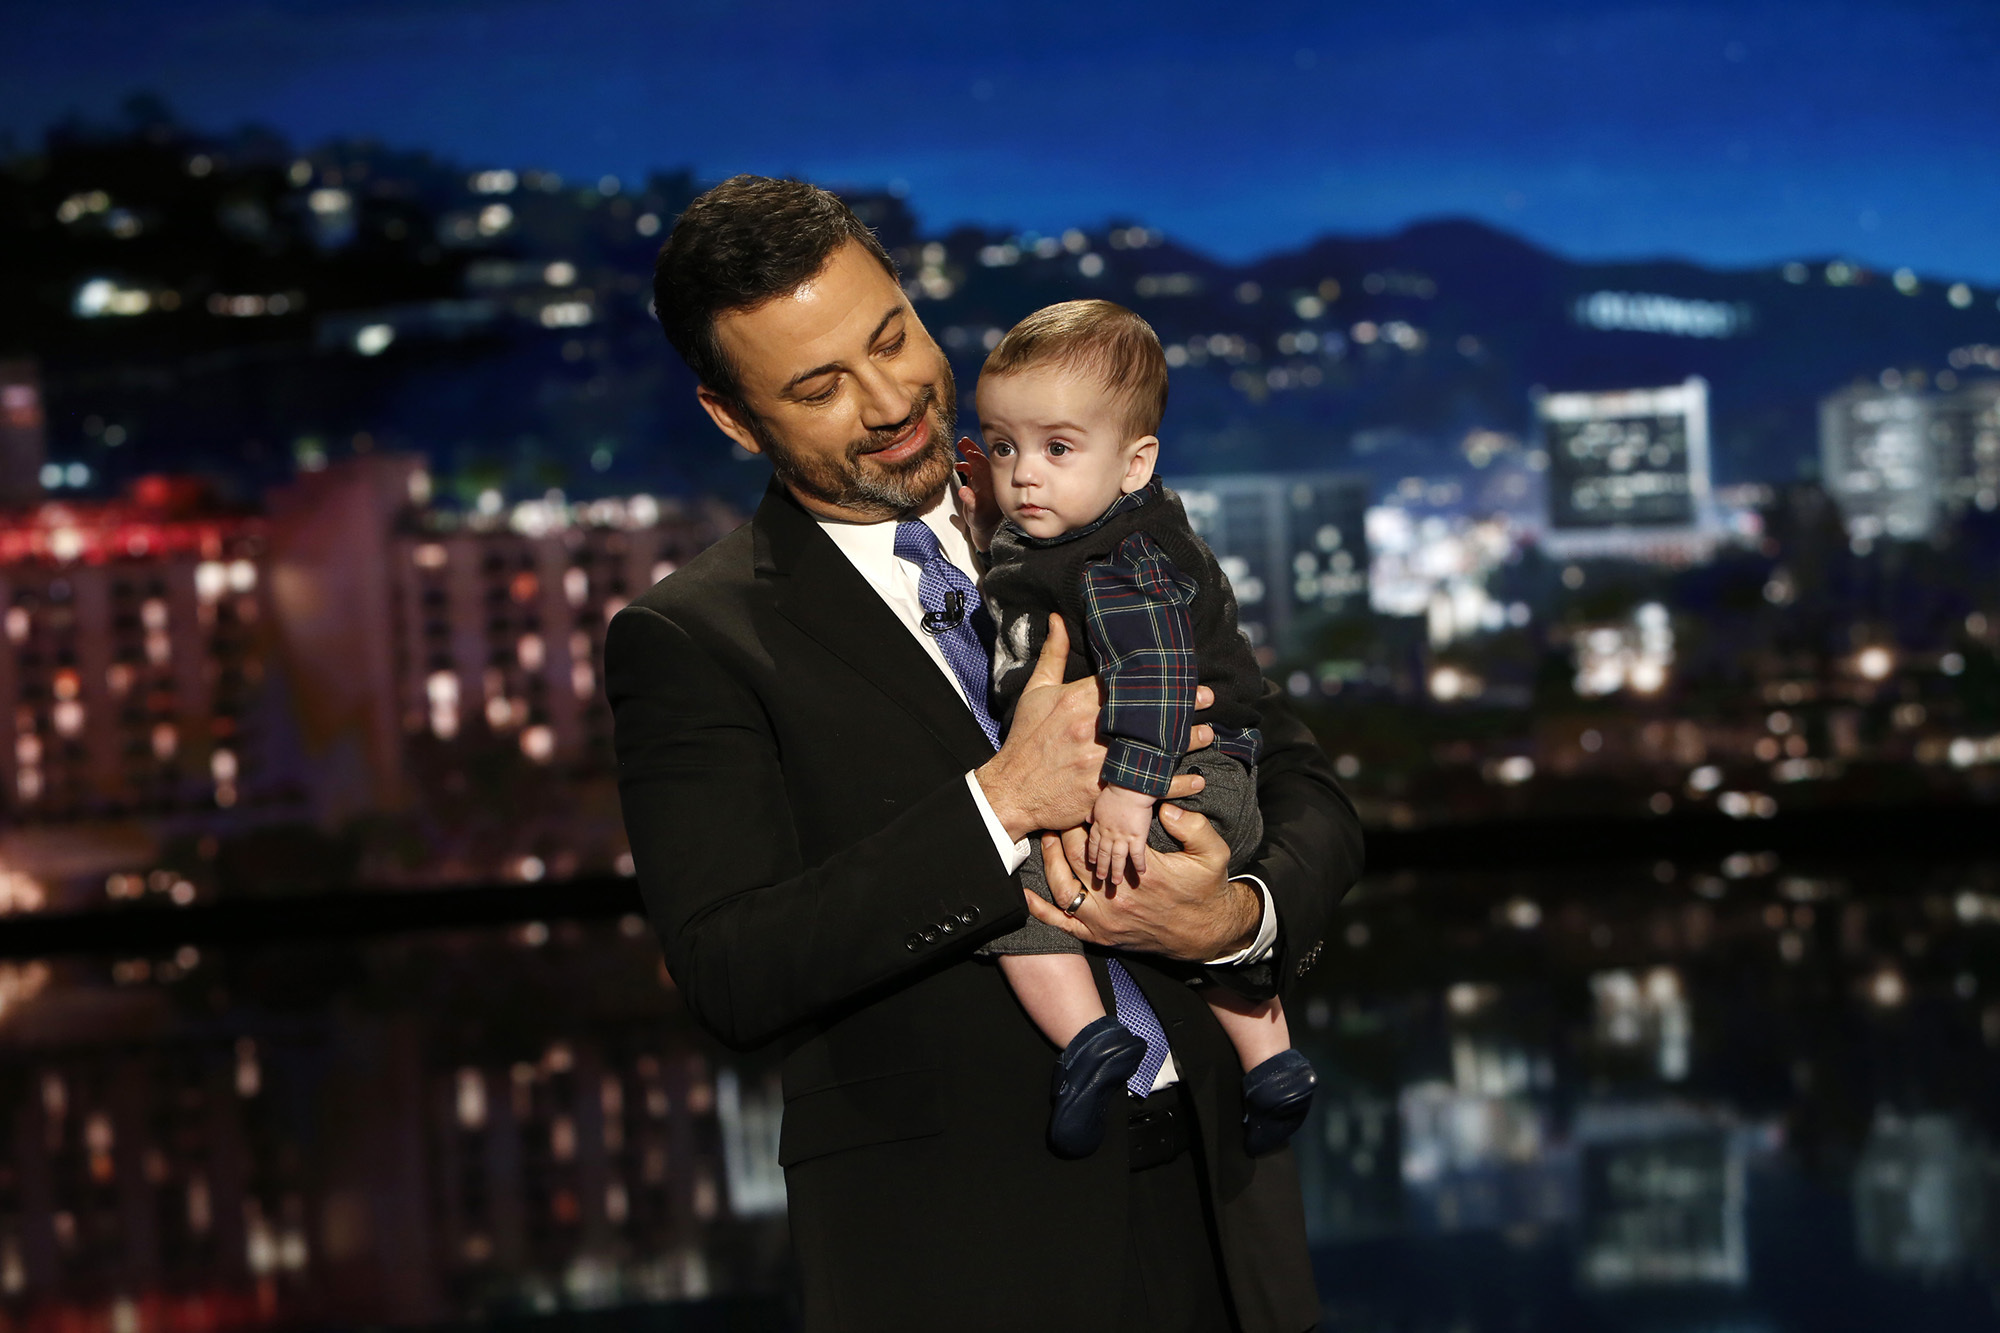 PHOTO: Jimmy Kimmel is pictured with his son Billy on "Jimmy Kimmel Live!", Dec. 11, 2017.